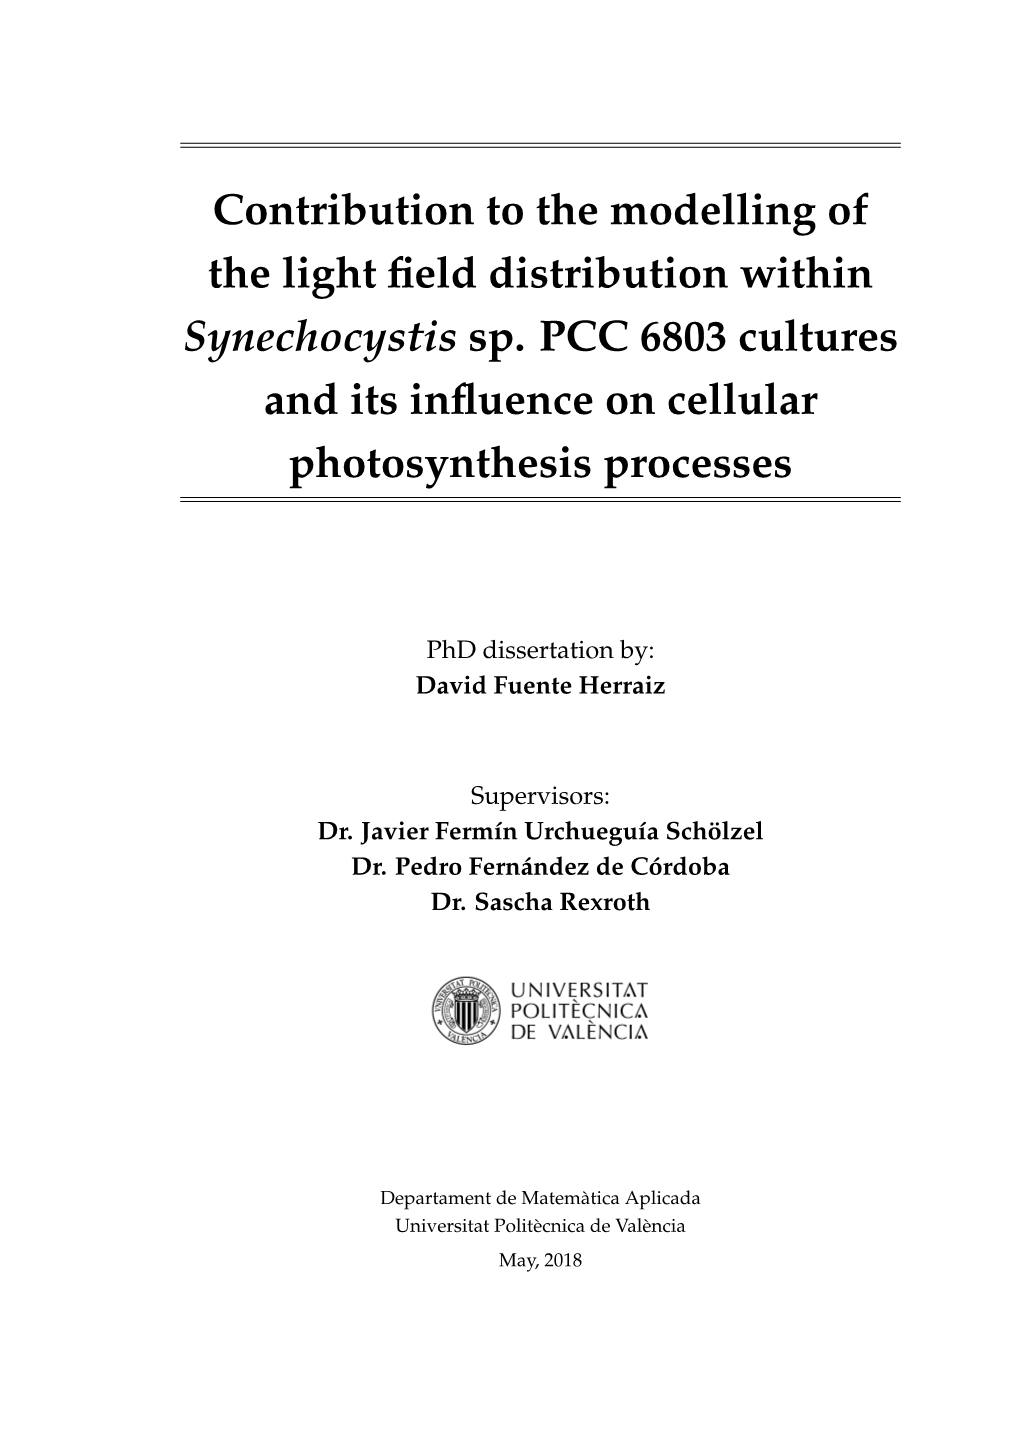 Contribution to the Modelling of the Light Field Distribution Within